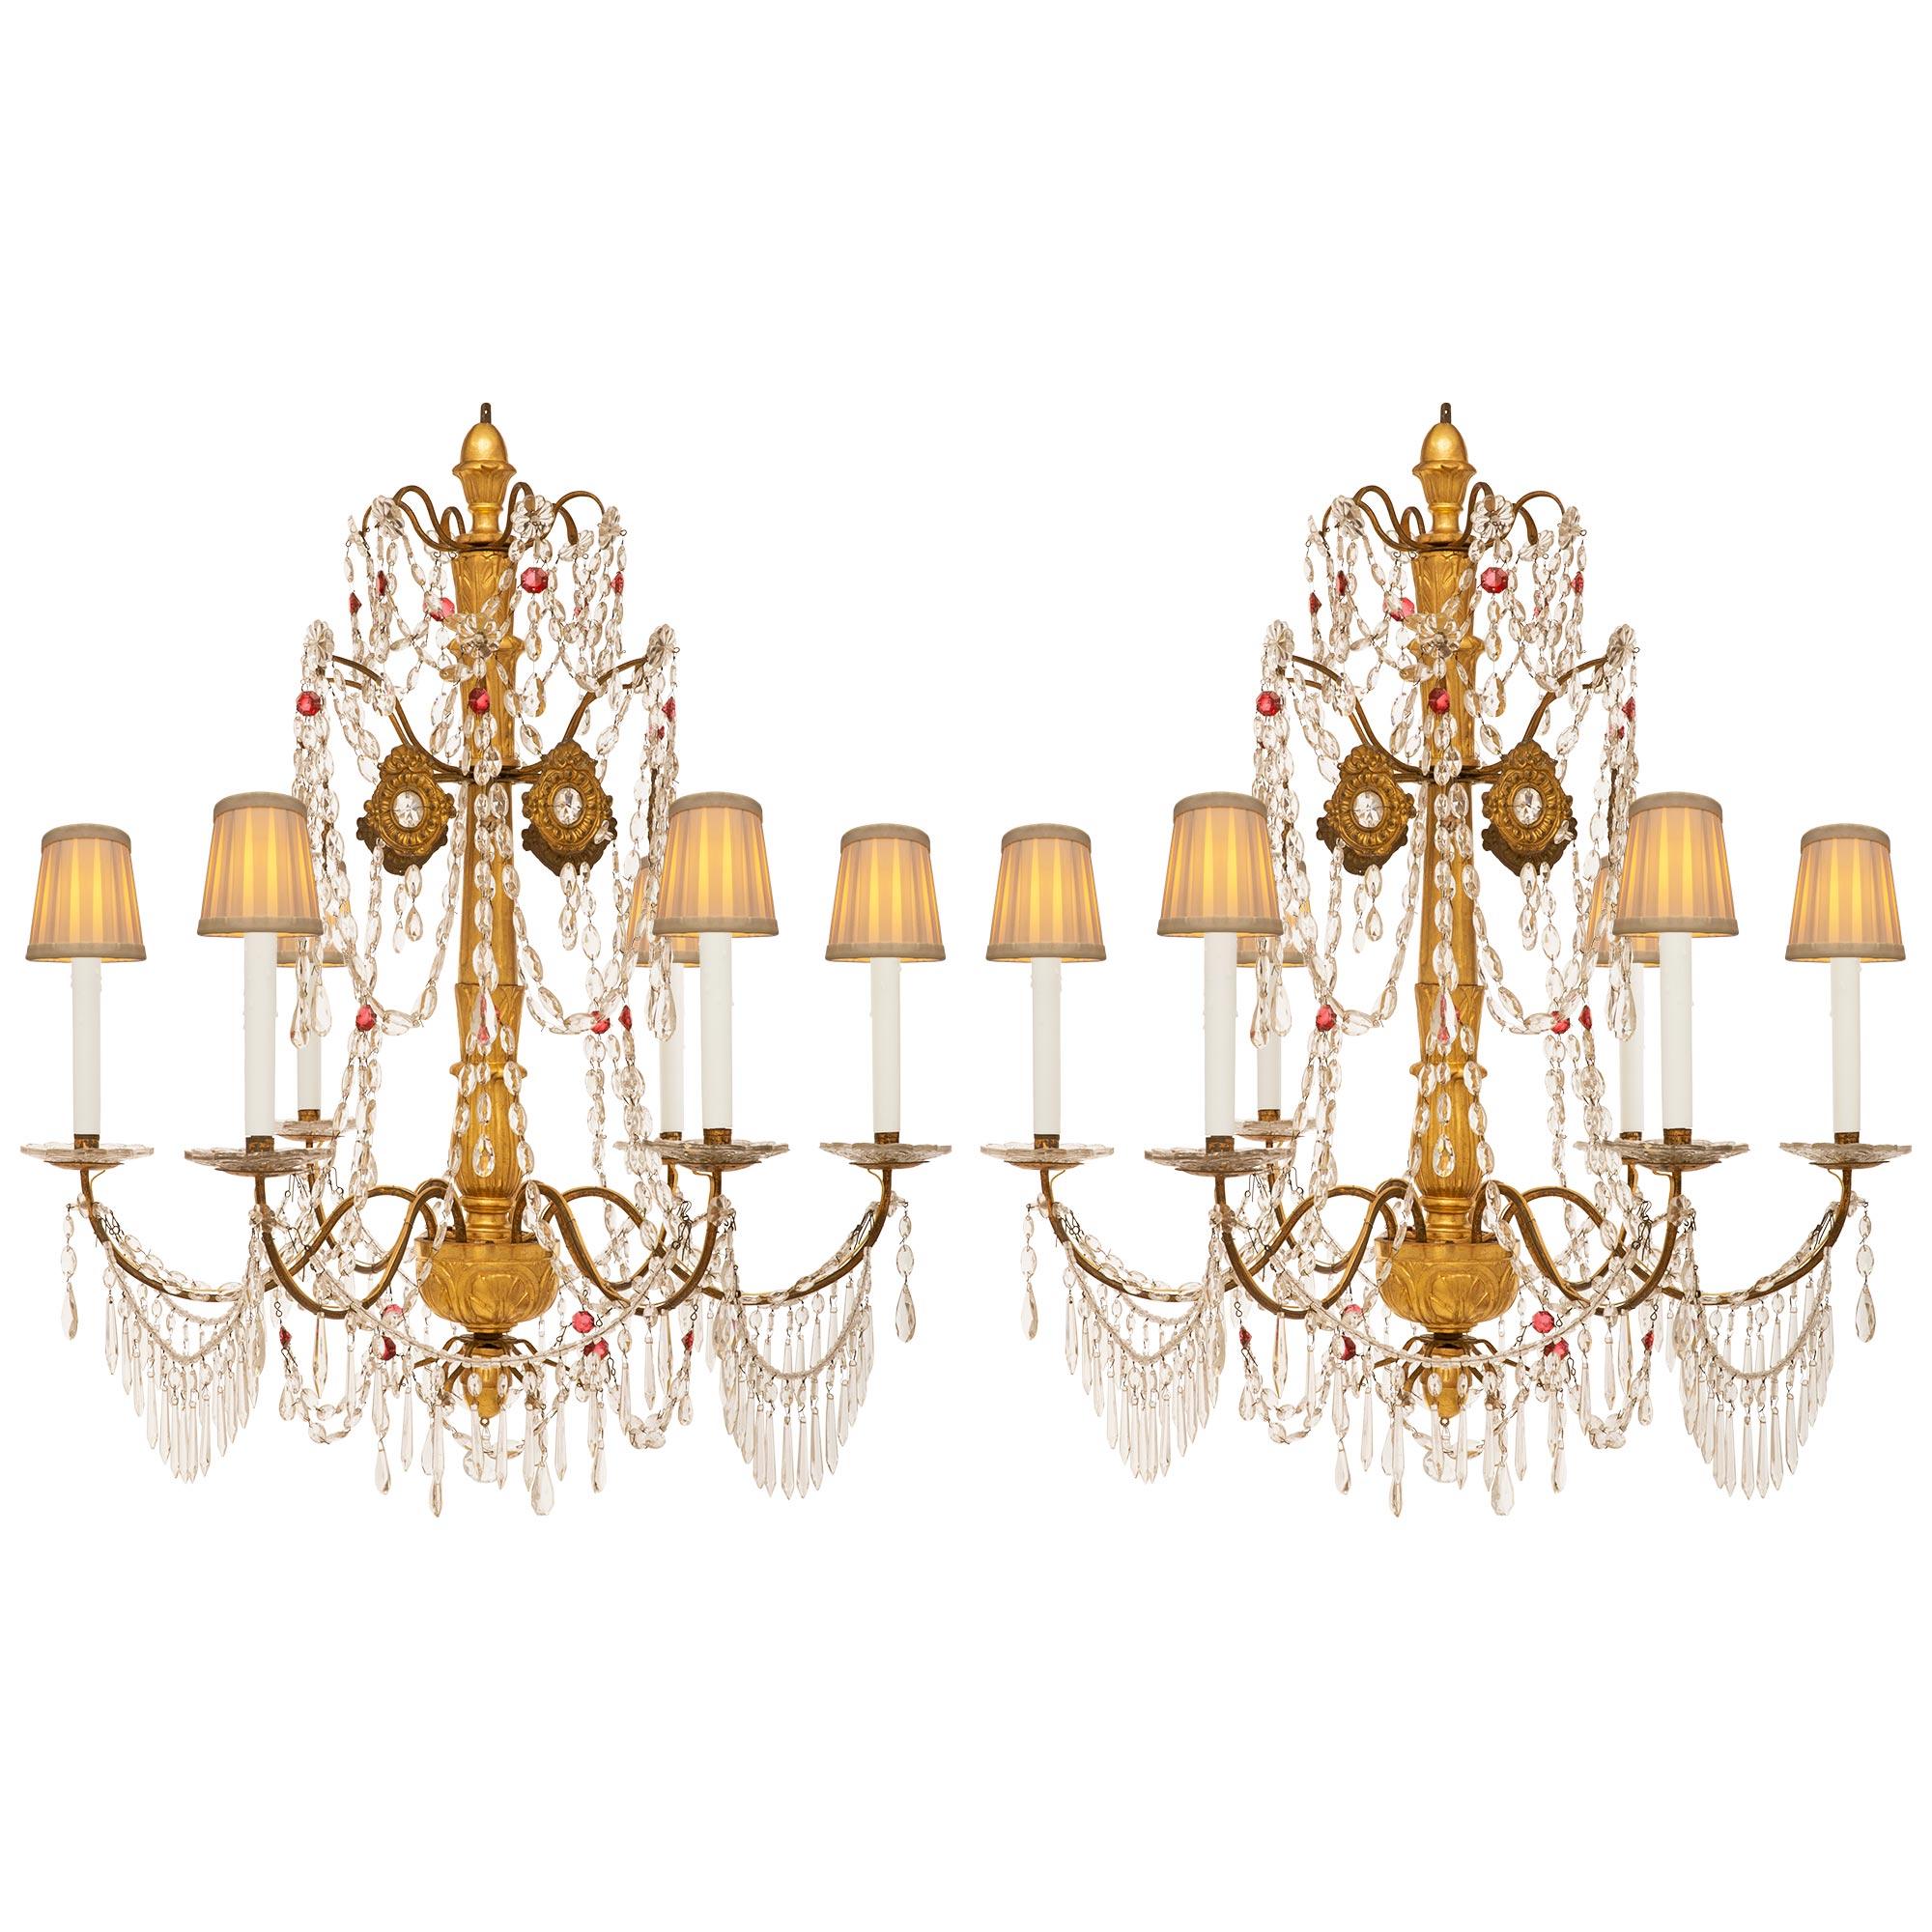 Pair Of Italian 18th c. Genovese St. Giltwood, Glass, Iron & Crystal Chandeliers